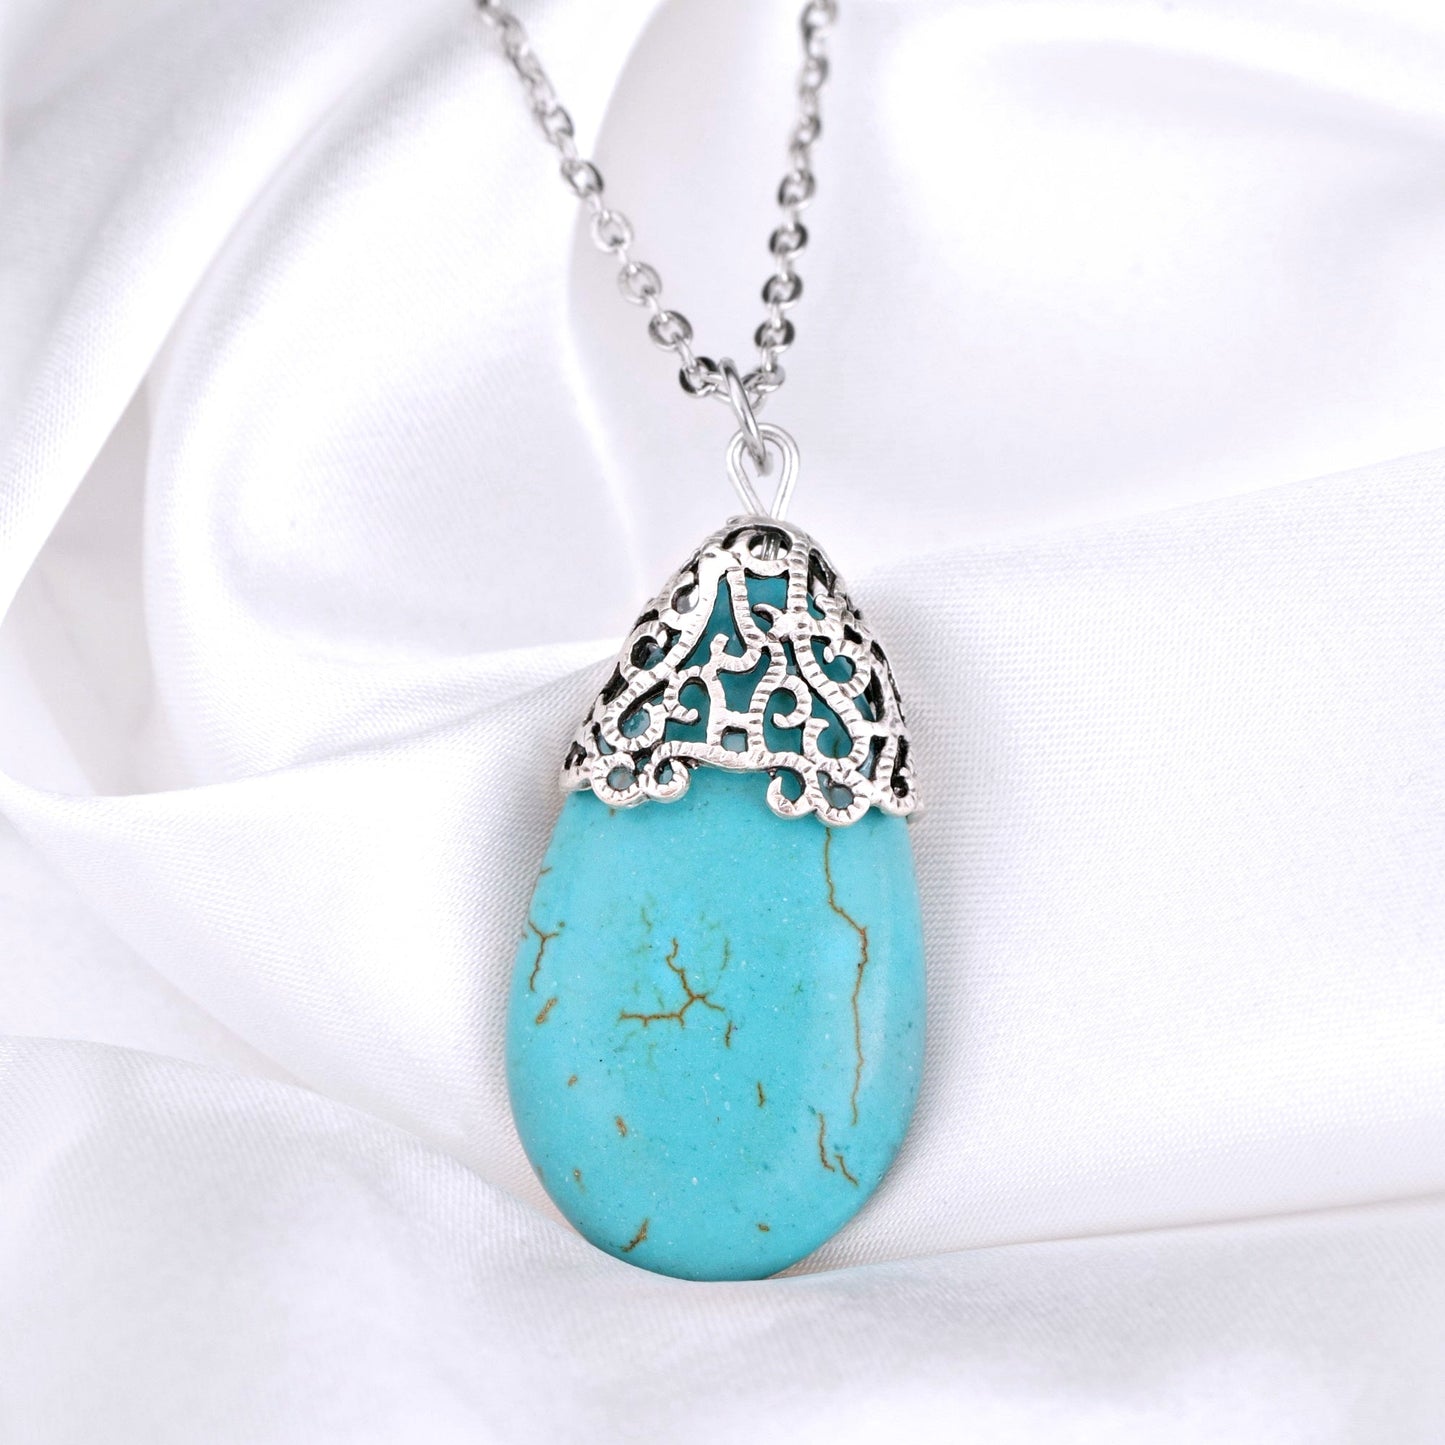 Turquoise Howlite Chain with Ornaments - VIK-106